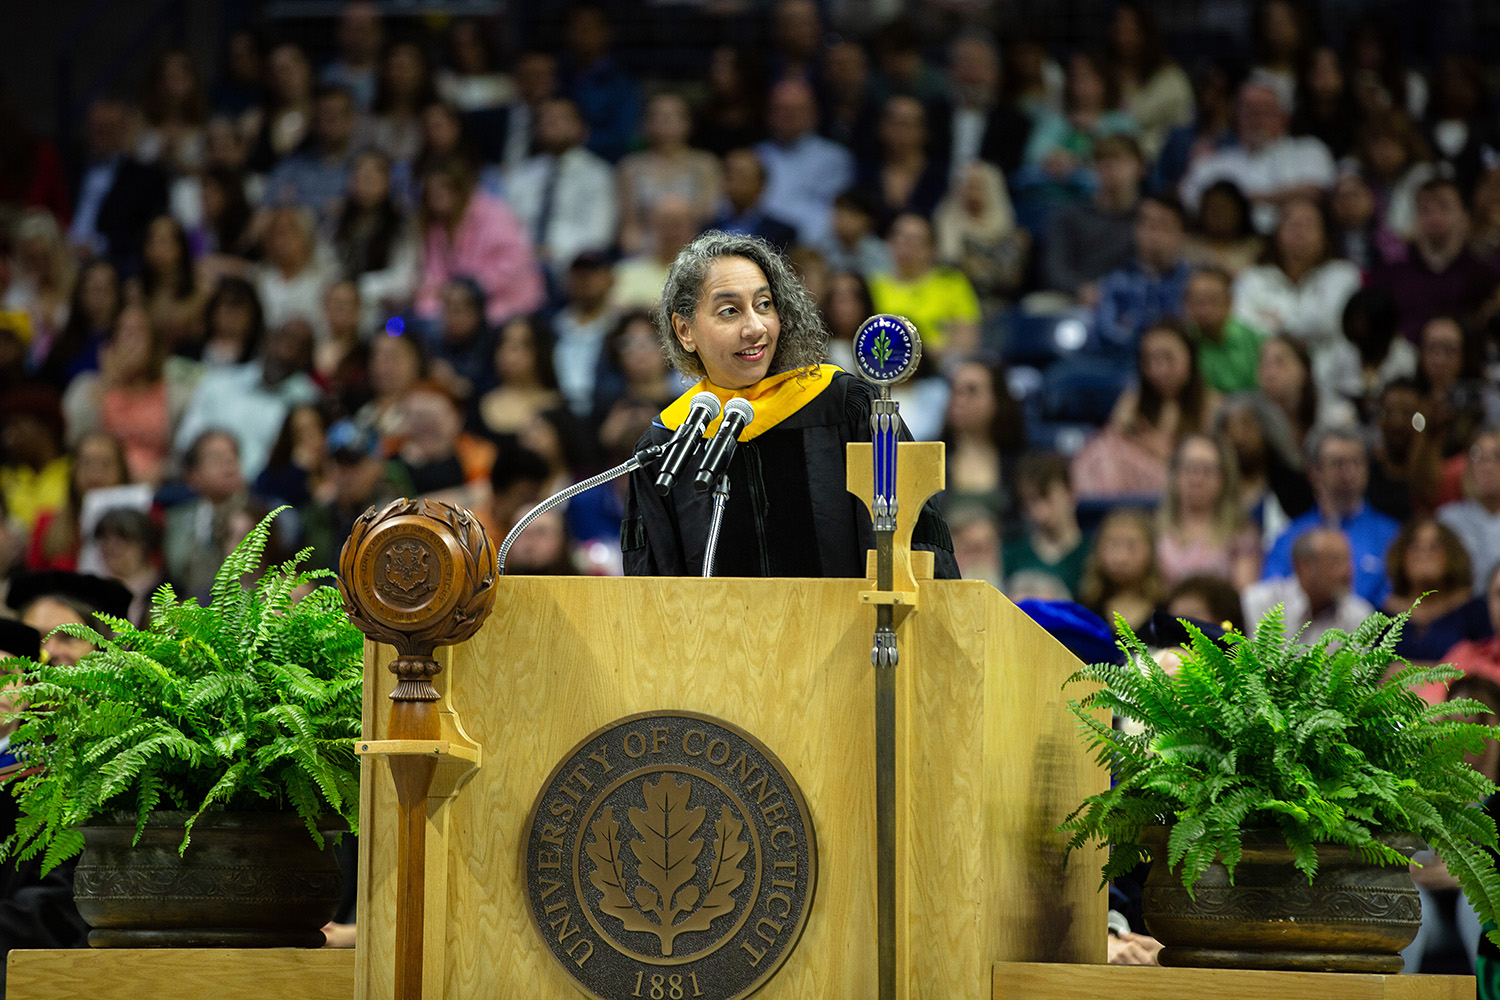 Talitha Washington stands behind the podium during commencement.